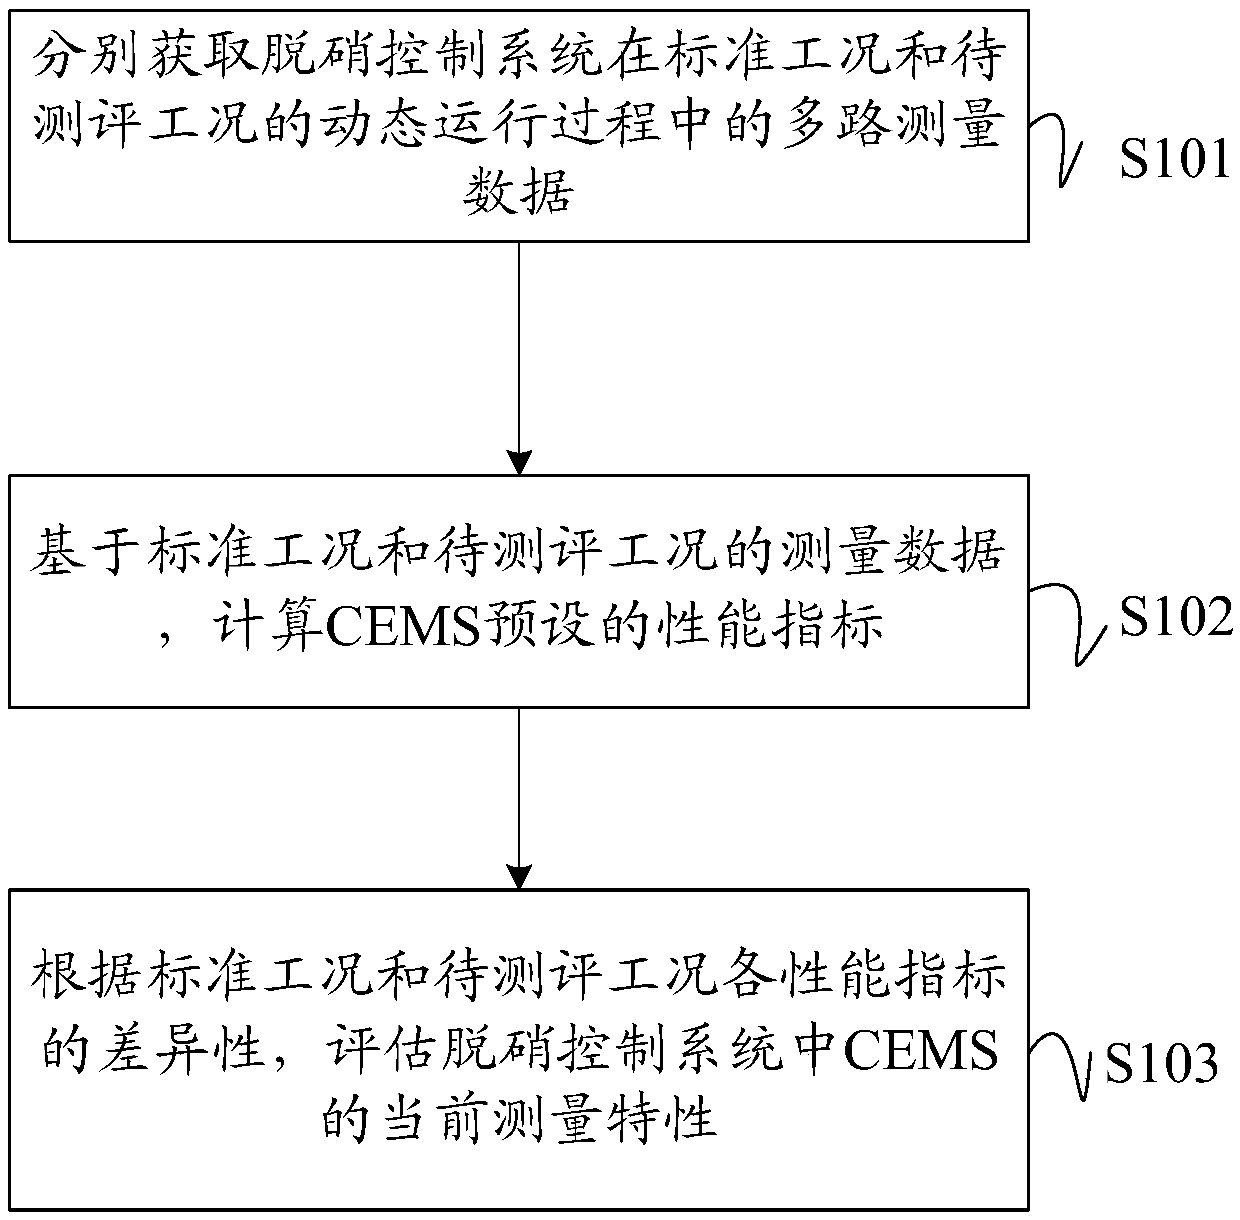 Estimation method and system for measurement properties of CEMS (Continuous Emission Monitoring System) of denitration system